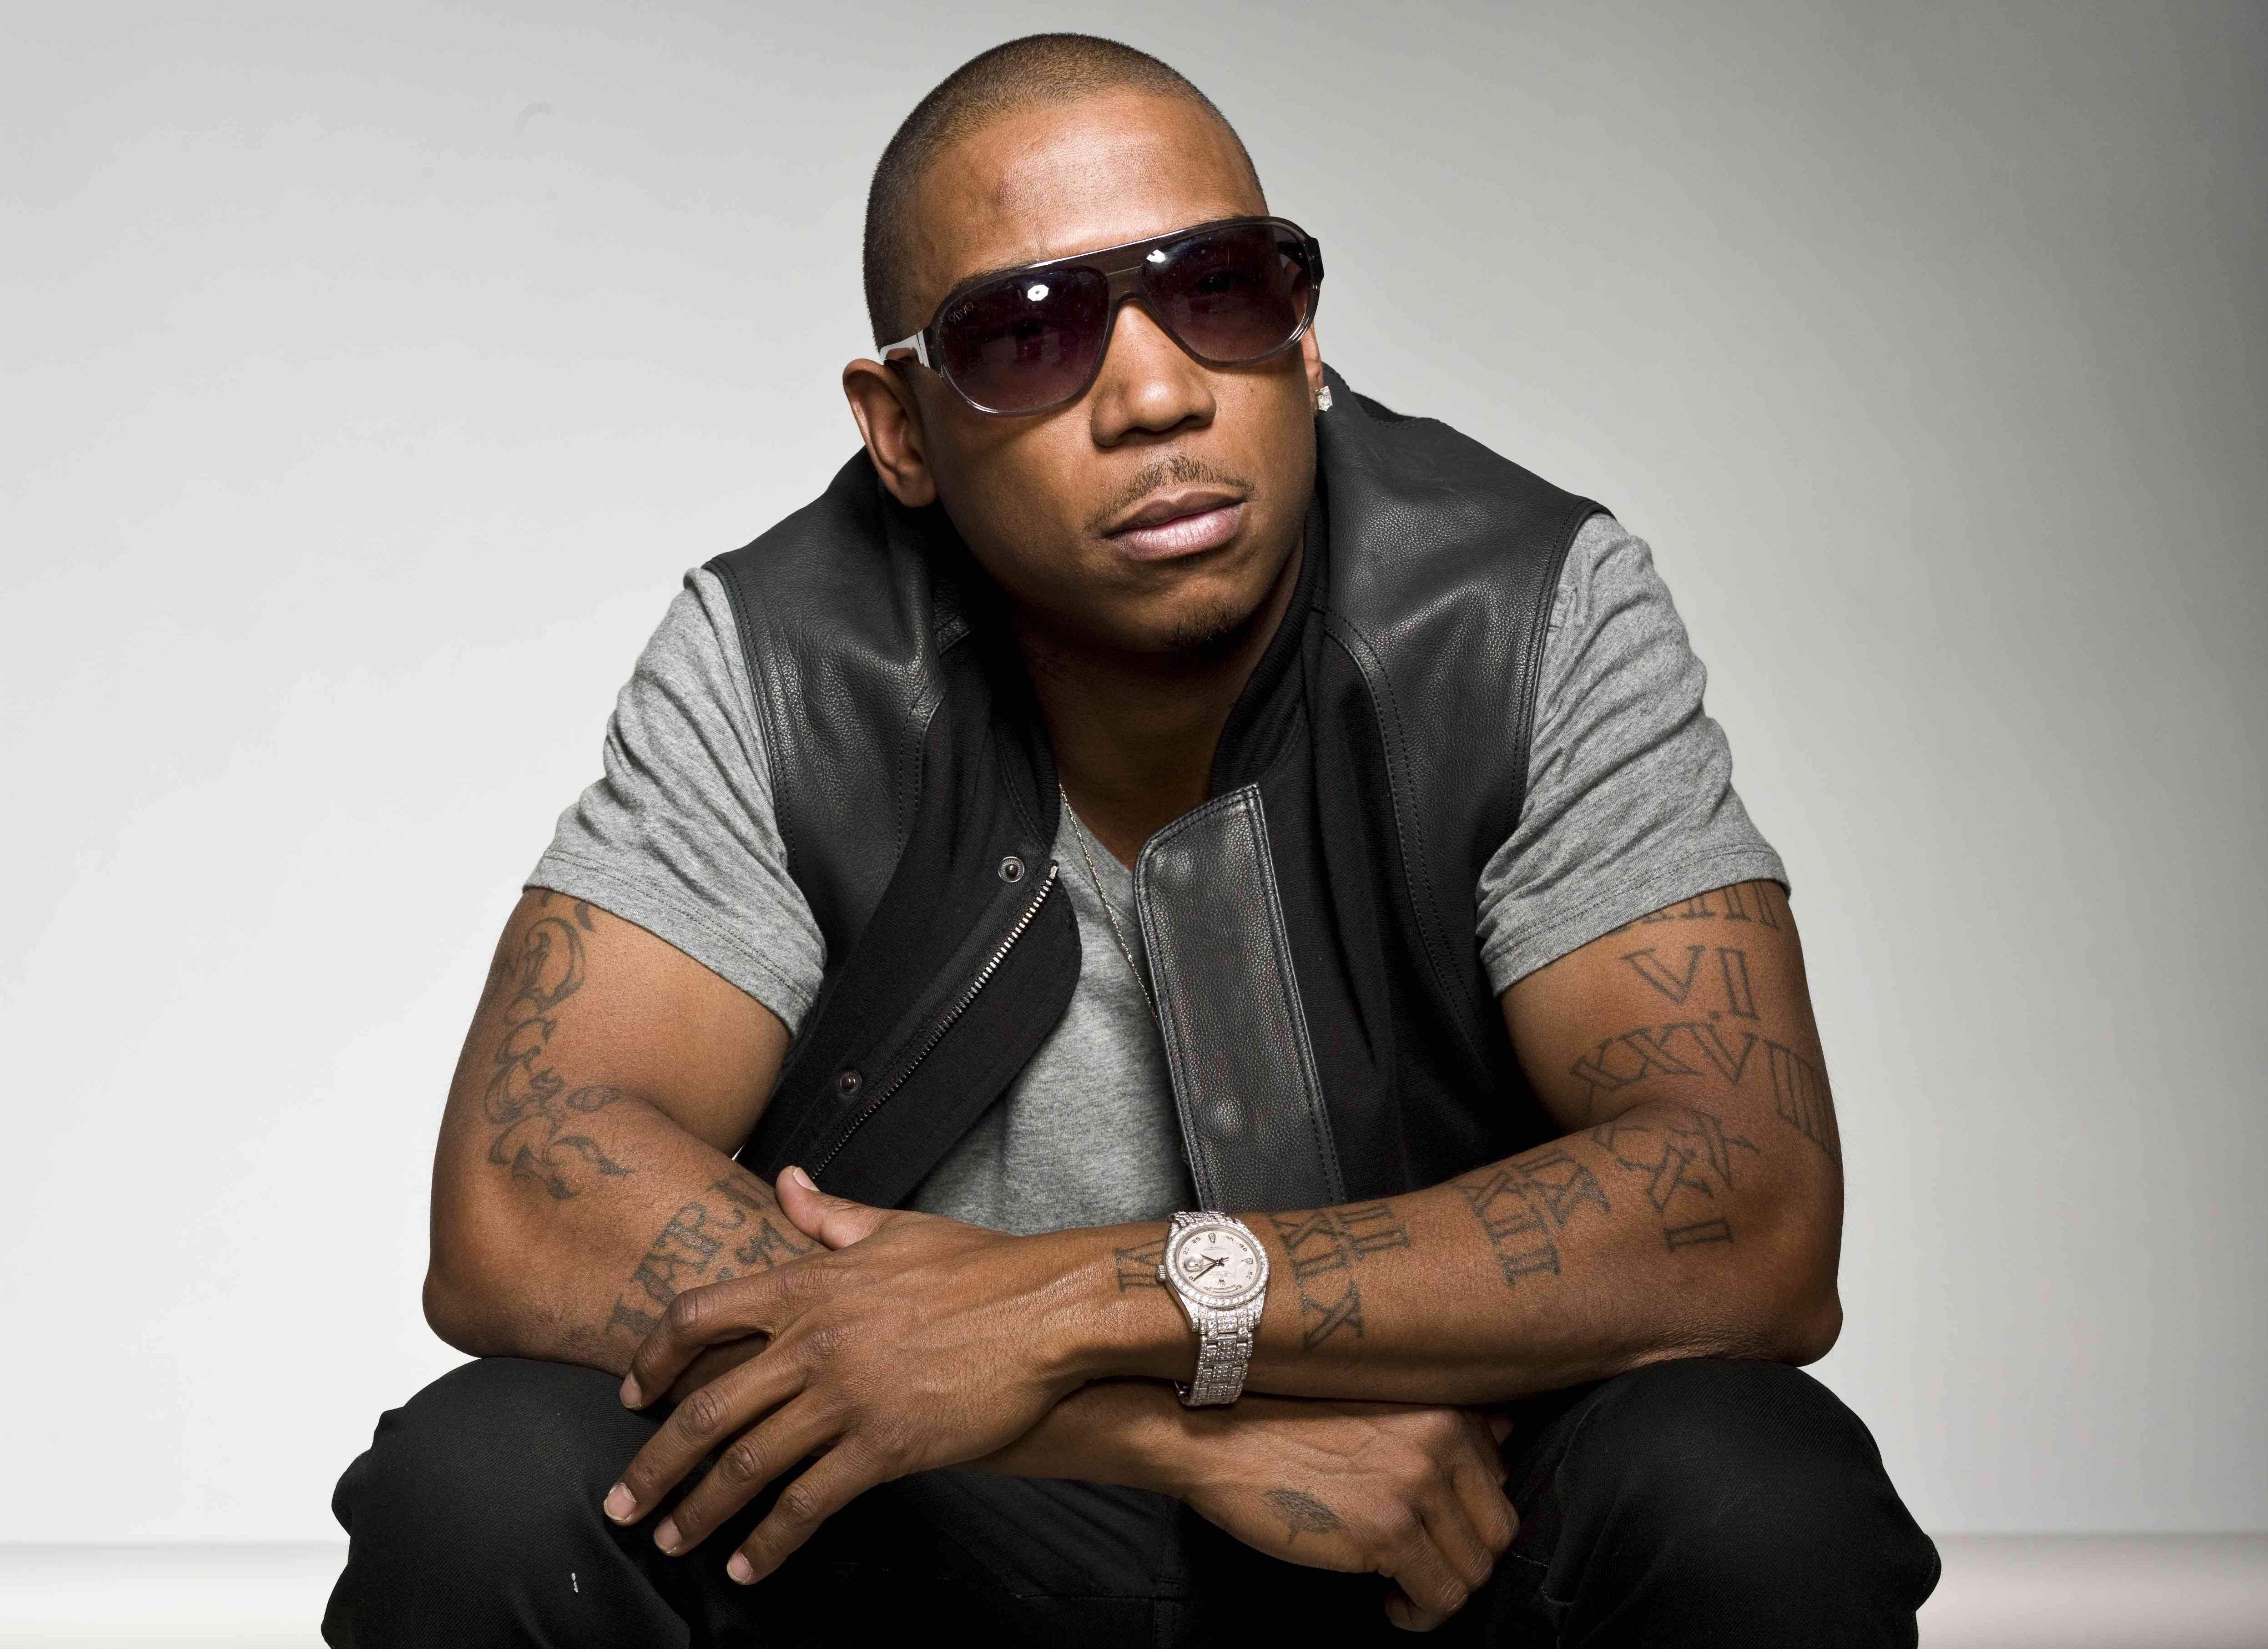 Ja Rule Wallpaper Image Photo Picture Background